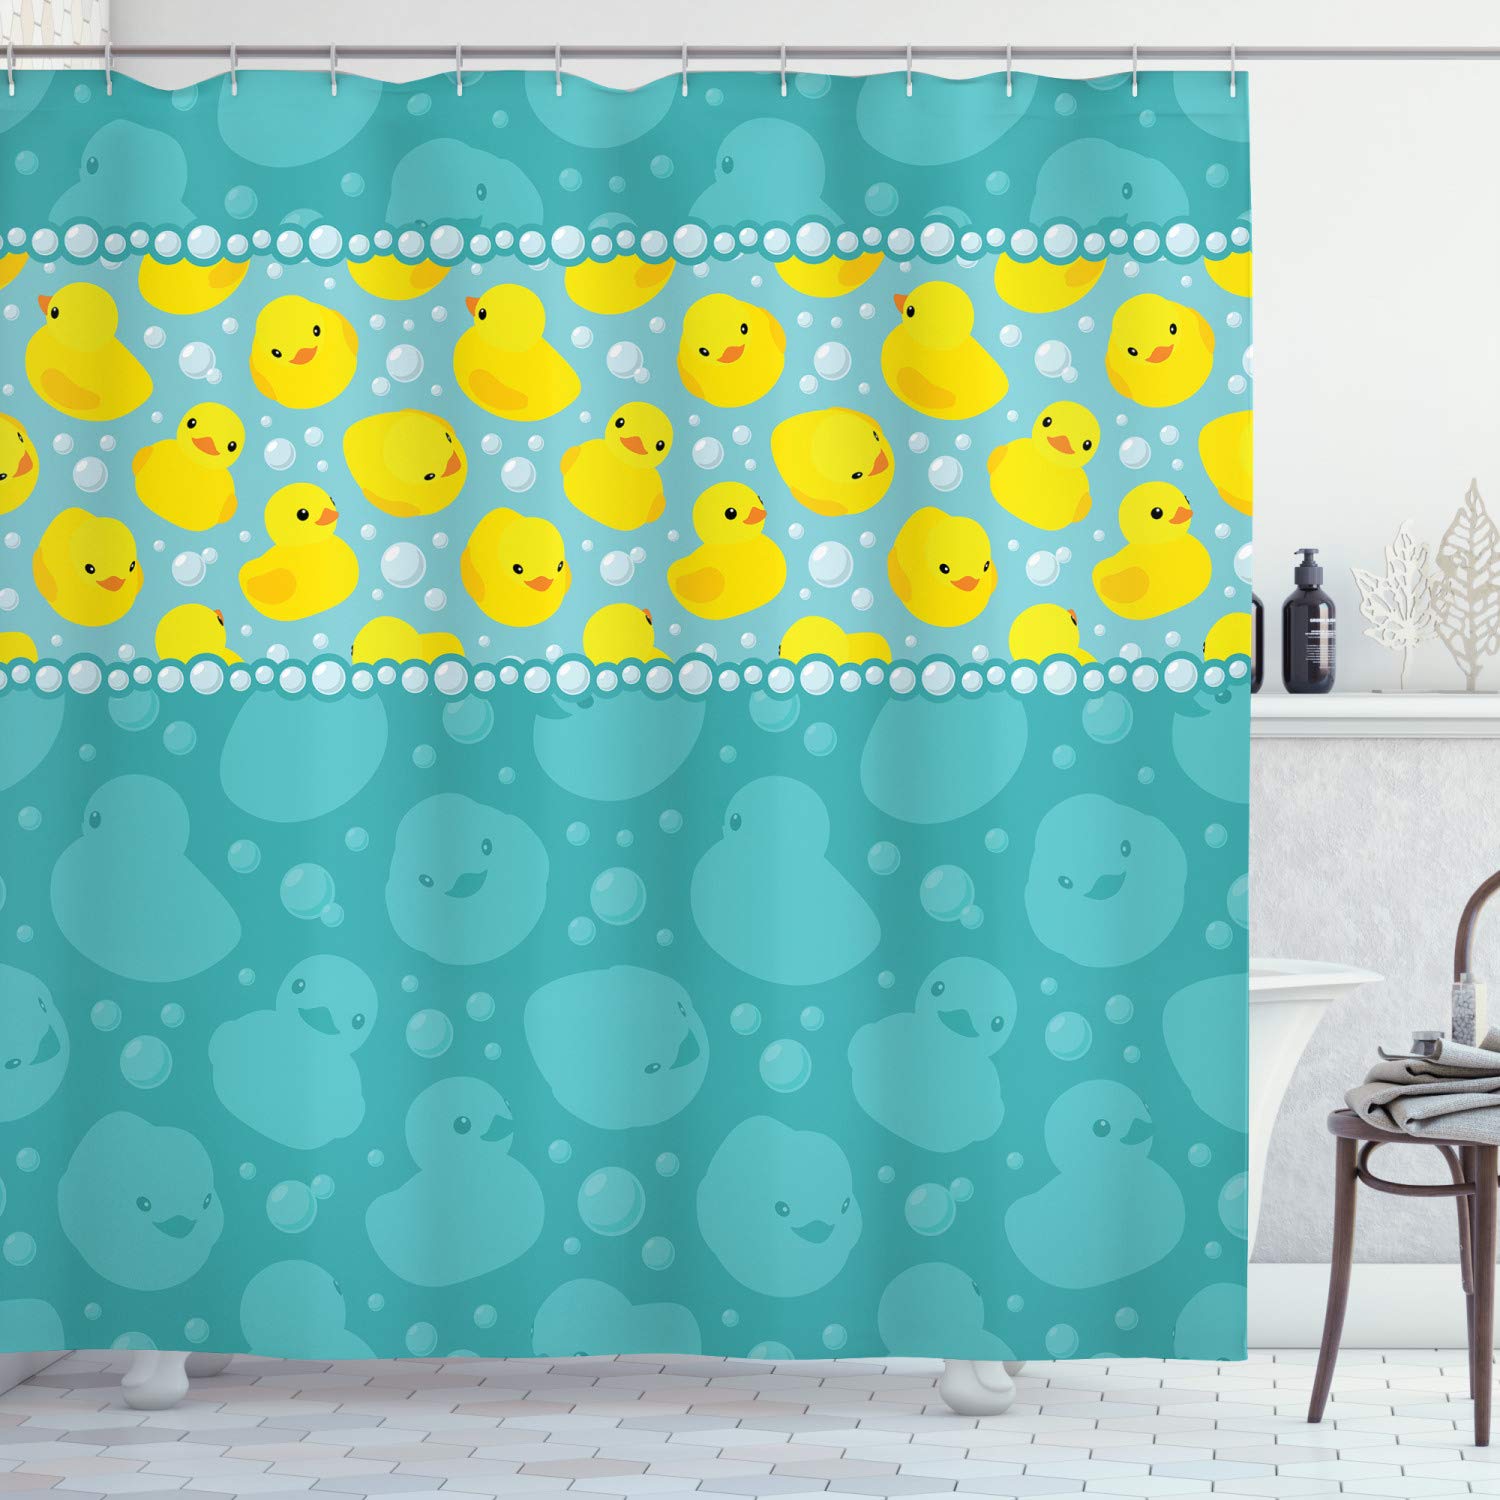 Ambesonne Rubber Duck Shower Curtain, Yellow Cartoon Duckies Swimming in Water Pattern with Fun Bubbles Aqua Colors, Cloth Fabric Bathroom Decor Set with Hooks, 70" Long, Teal Yellow